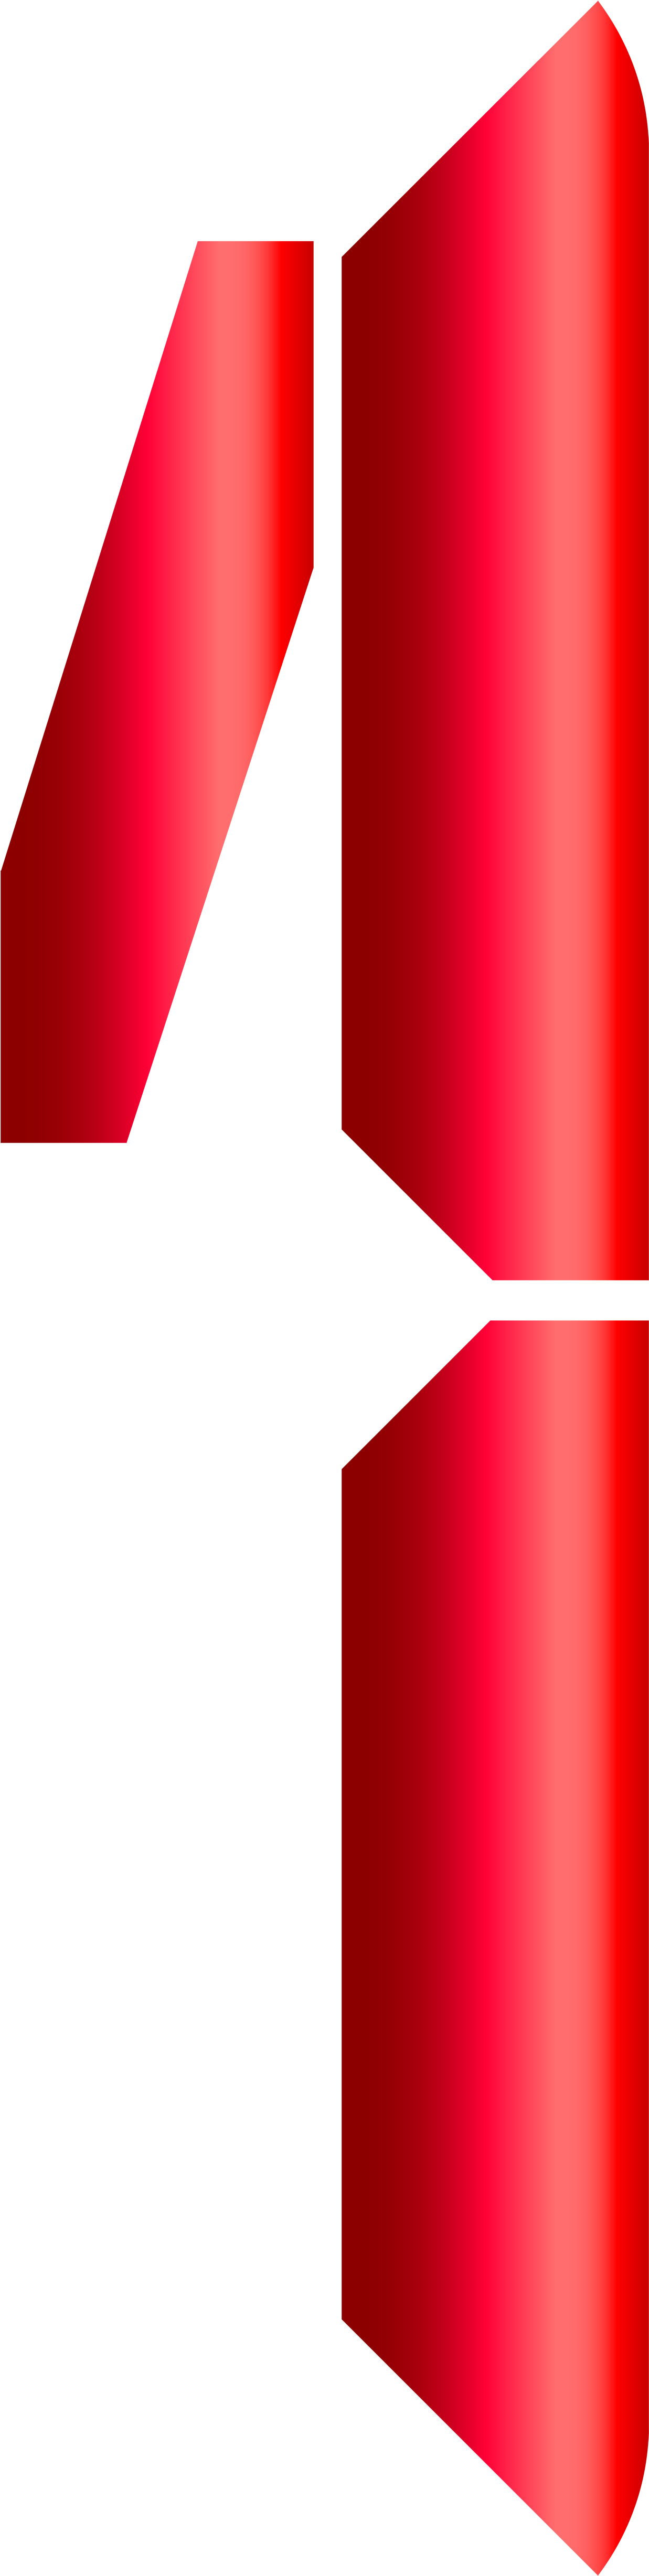 3 D Red Number47 Graphic PNG